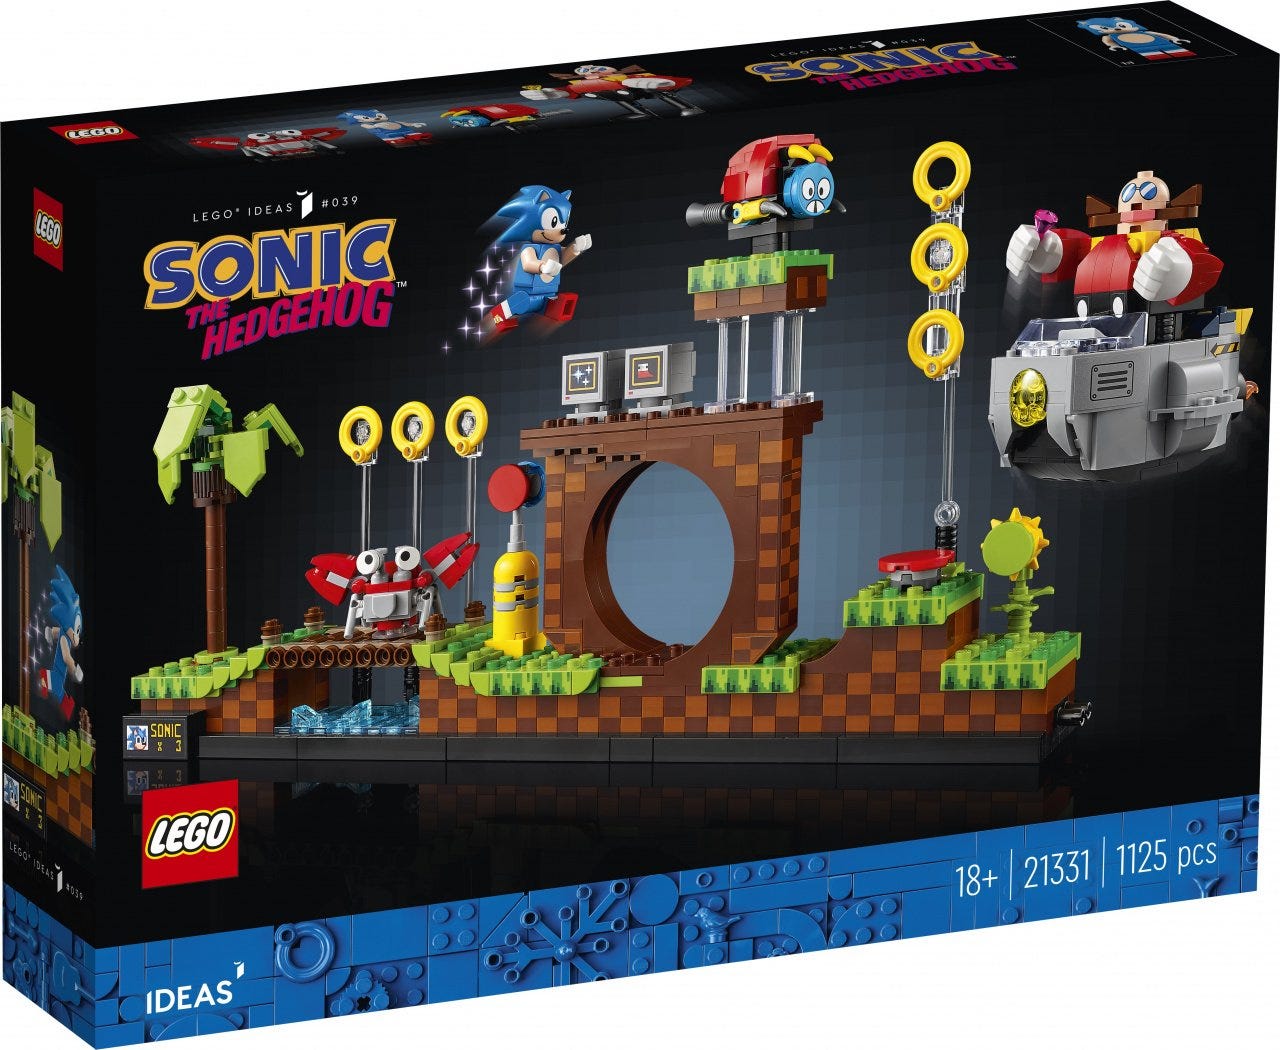 Lego Officially Reveals Its Sonic The Hedgehog - Green Hill Zone Set,  Available On 1st January 2022 - Nintendo Life